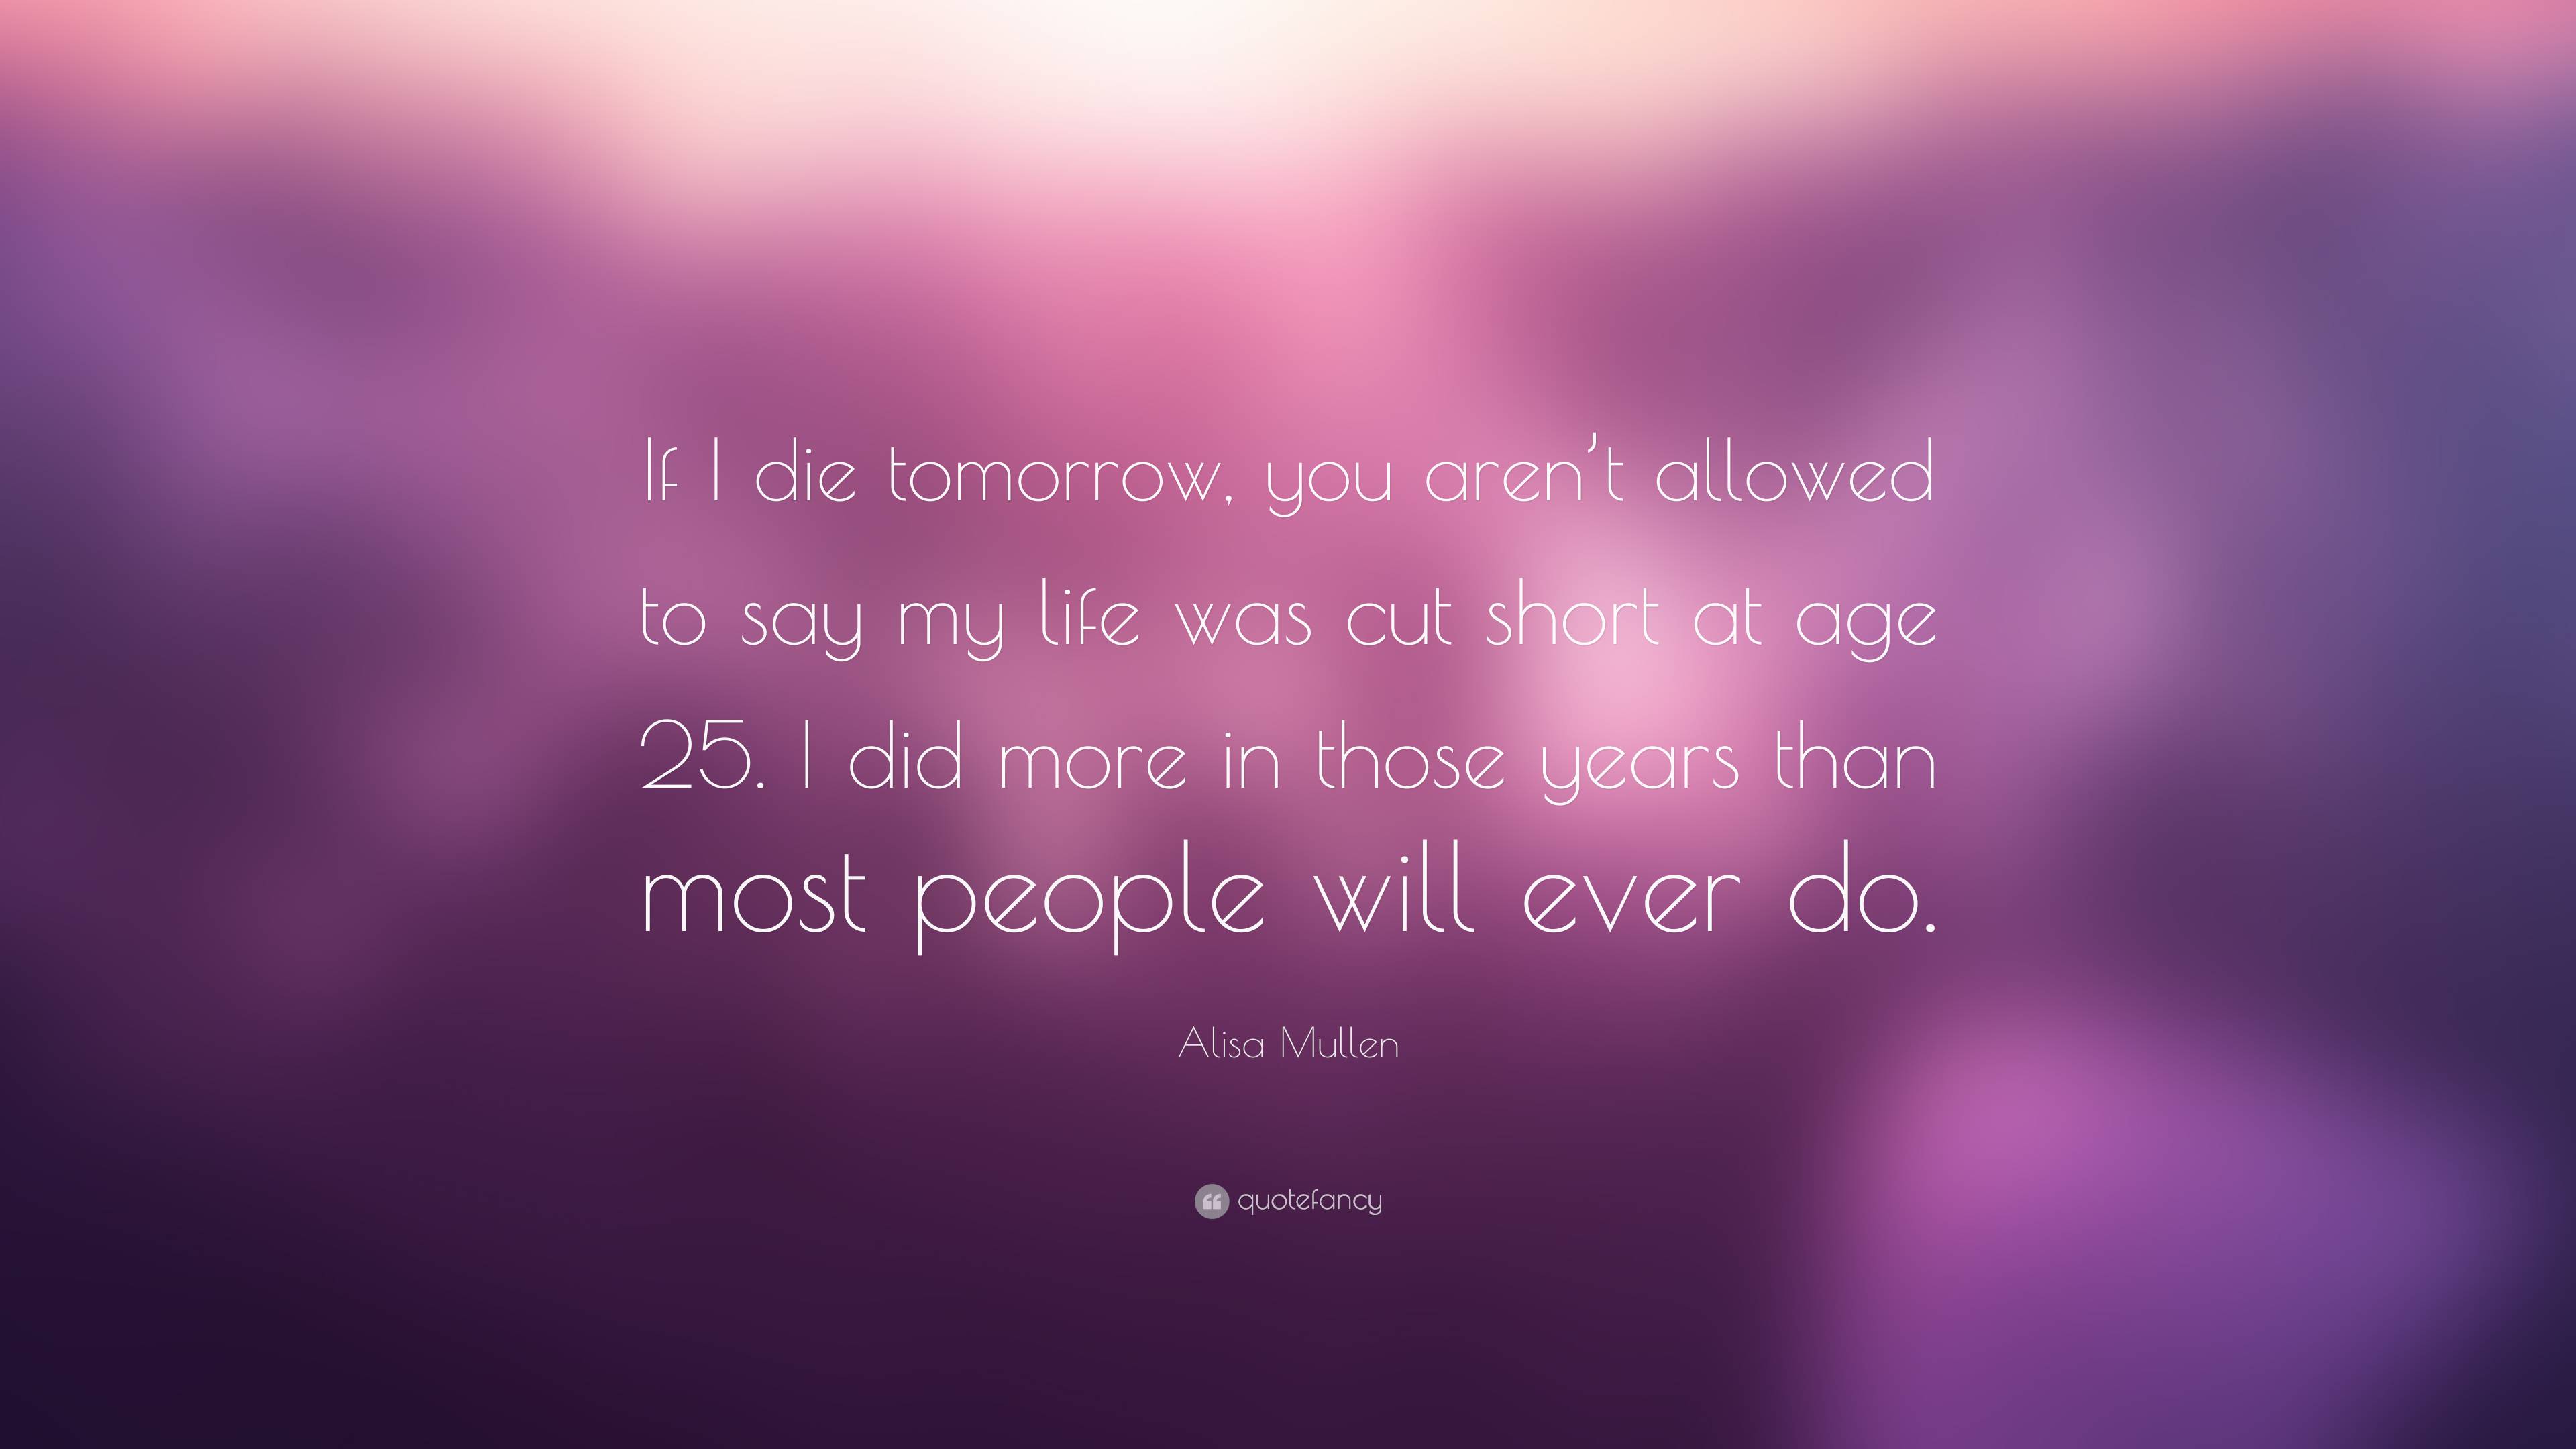 Alisa Mullen Quote: “If I die tomorrow, you aren’t allowed to say my ...